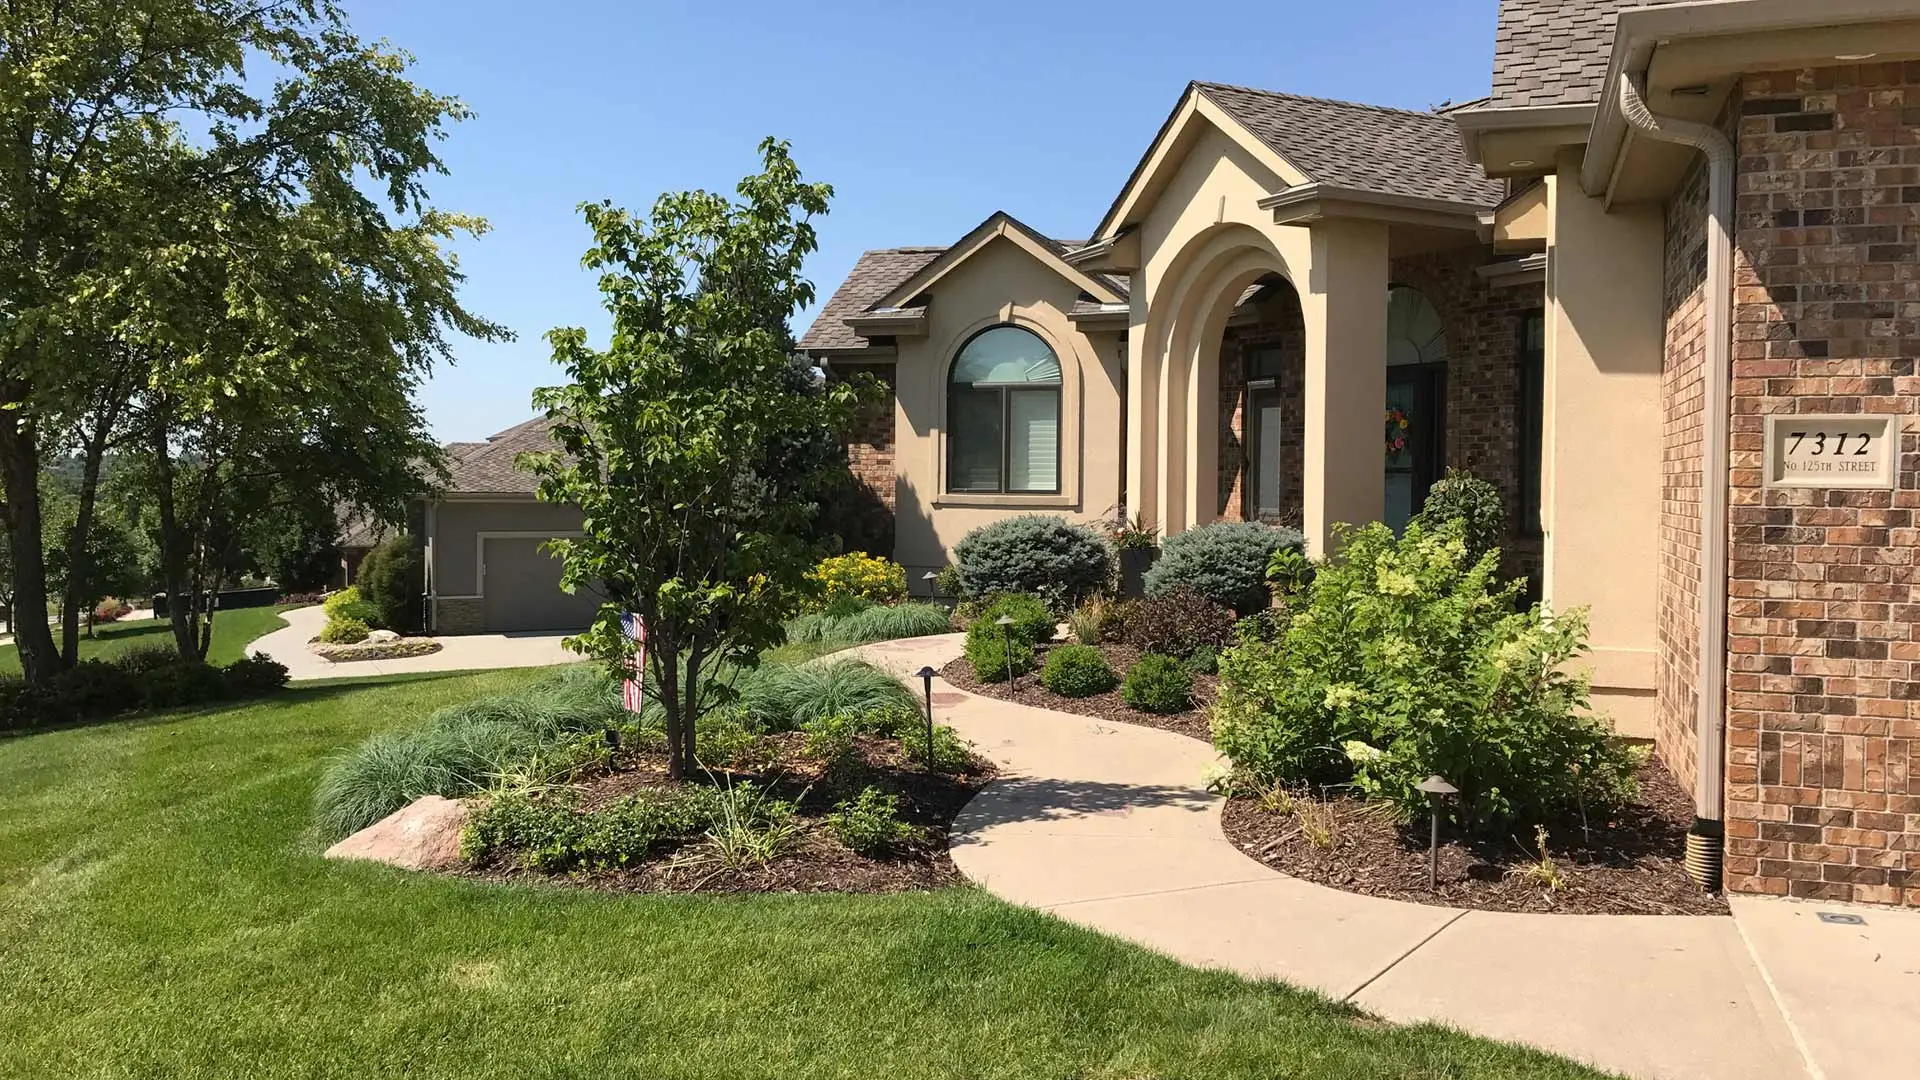 A home in Omaha, NE with fresh landscape beds and trees. 